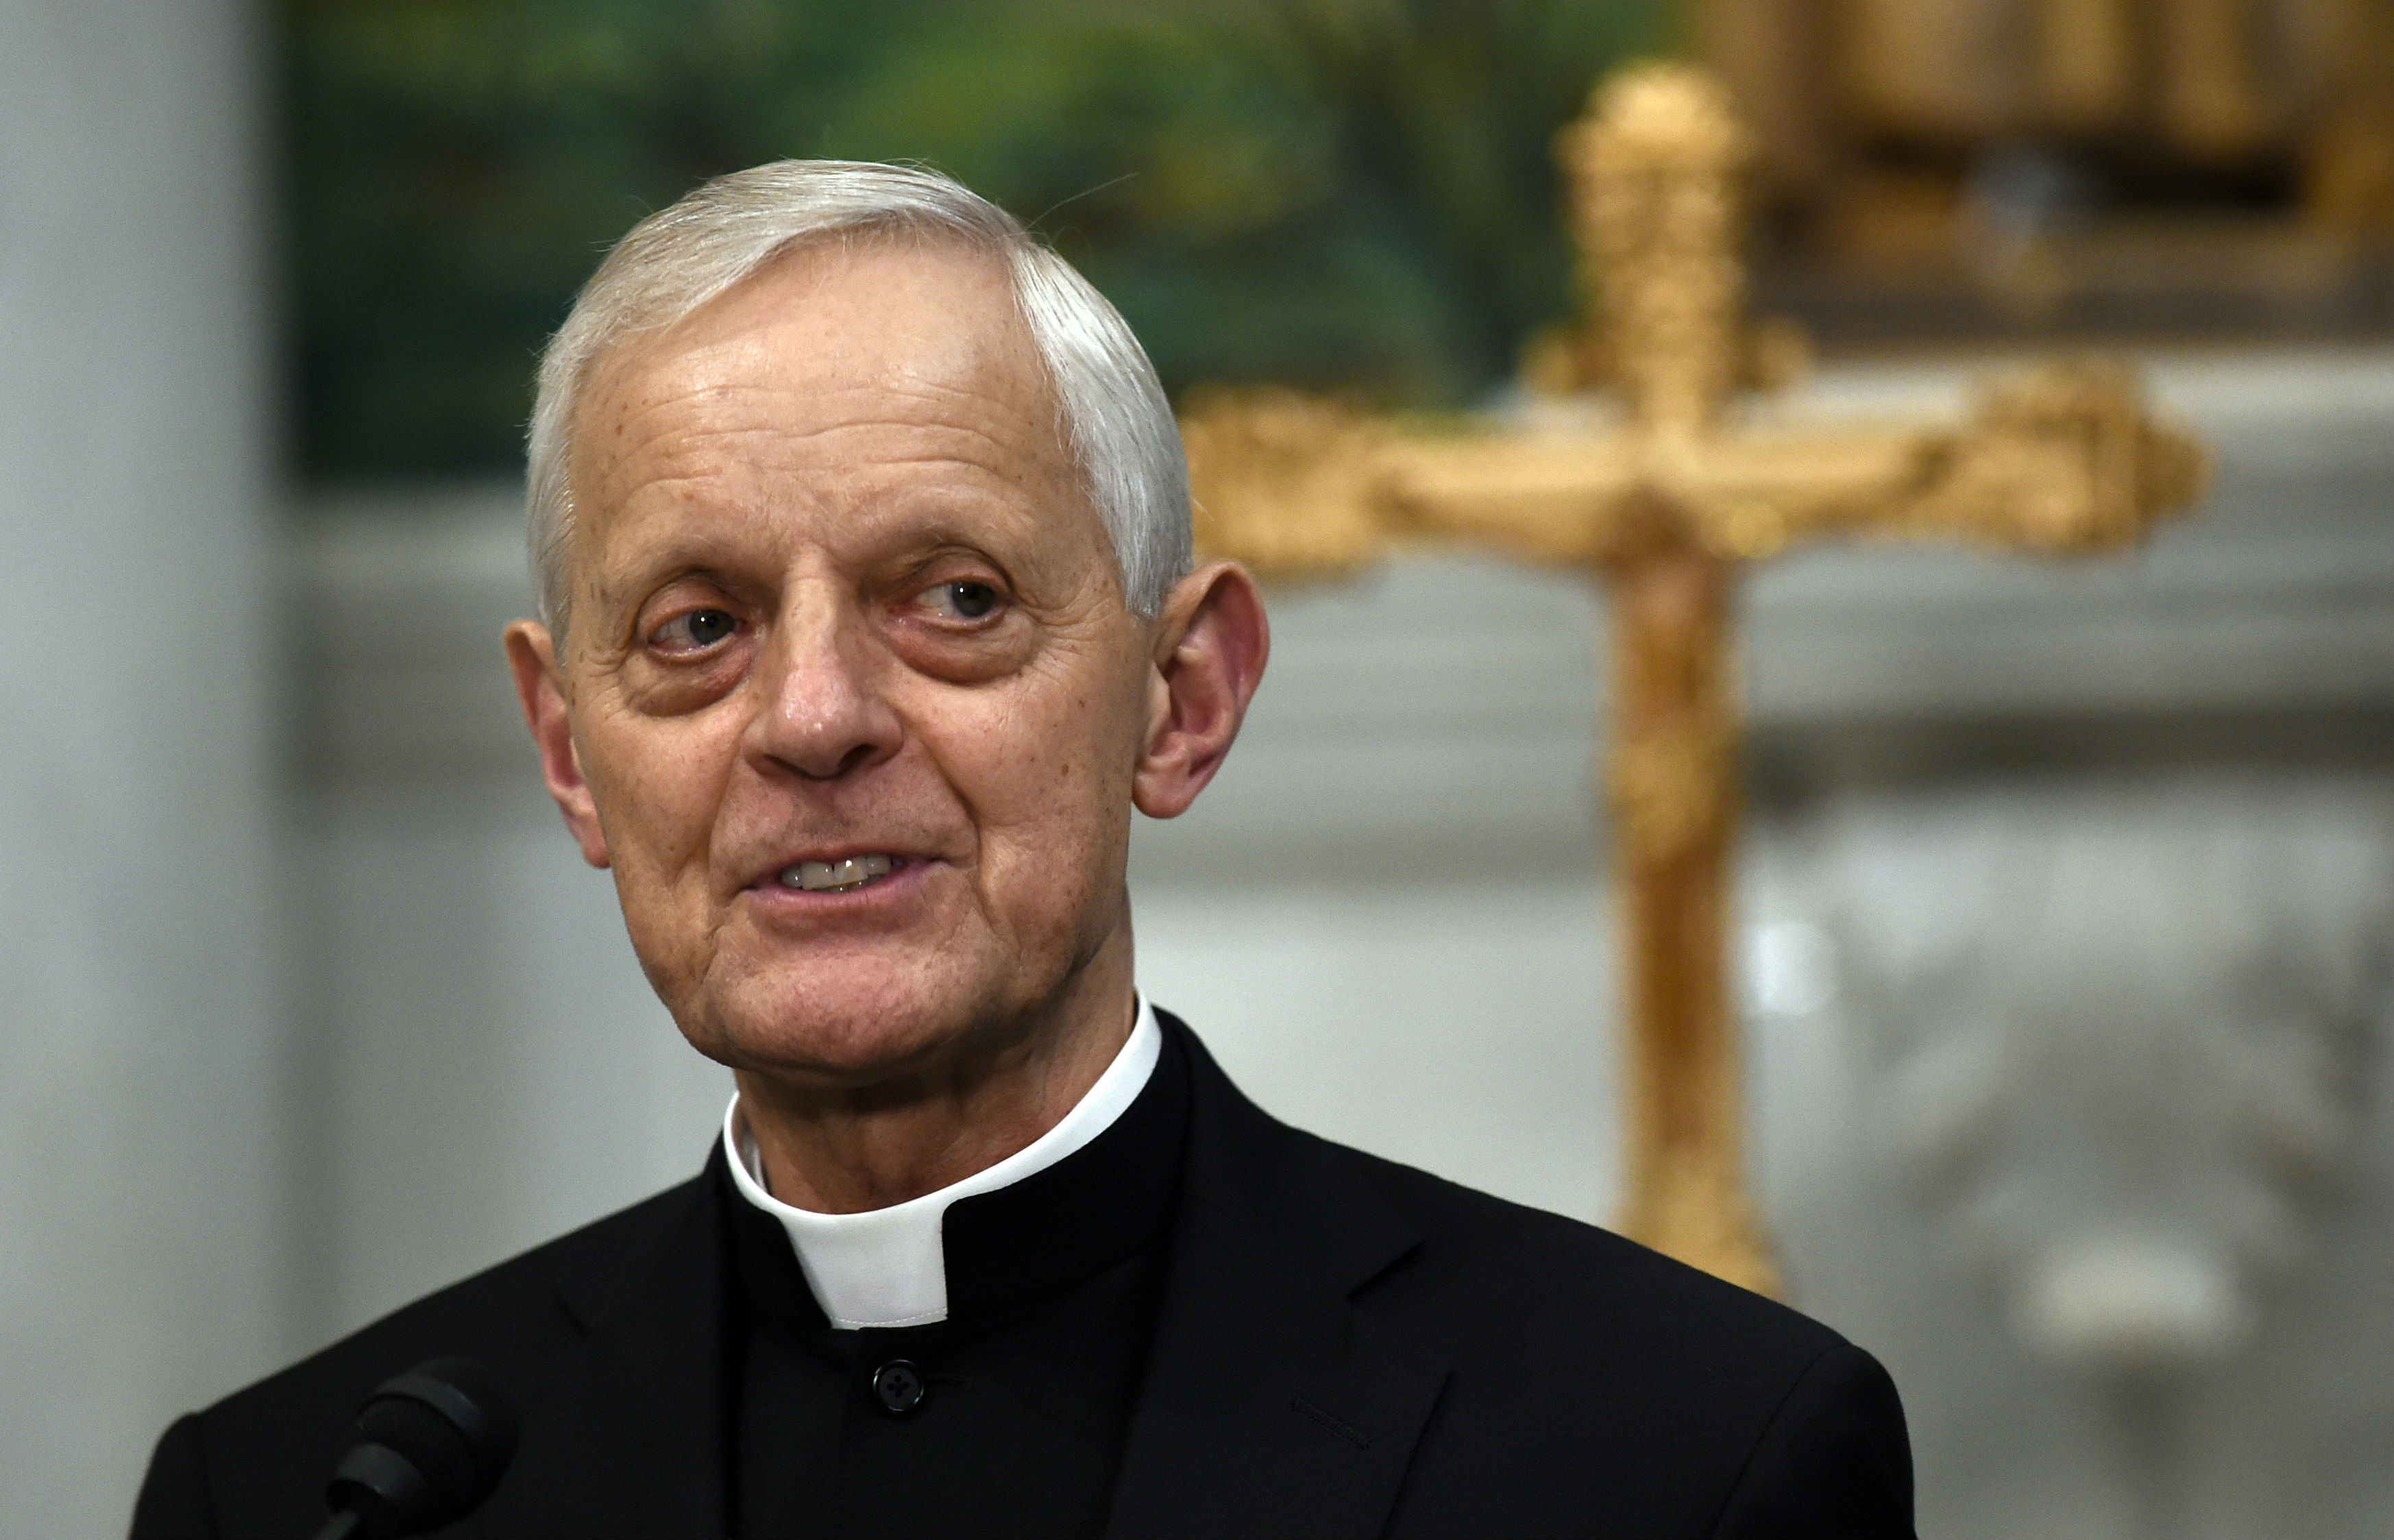 Cardinal Wuerl gives advice on evangelisation amid ‘cultural tsunami’ of secularism